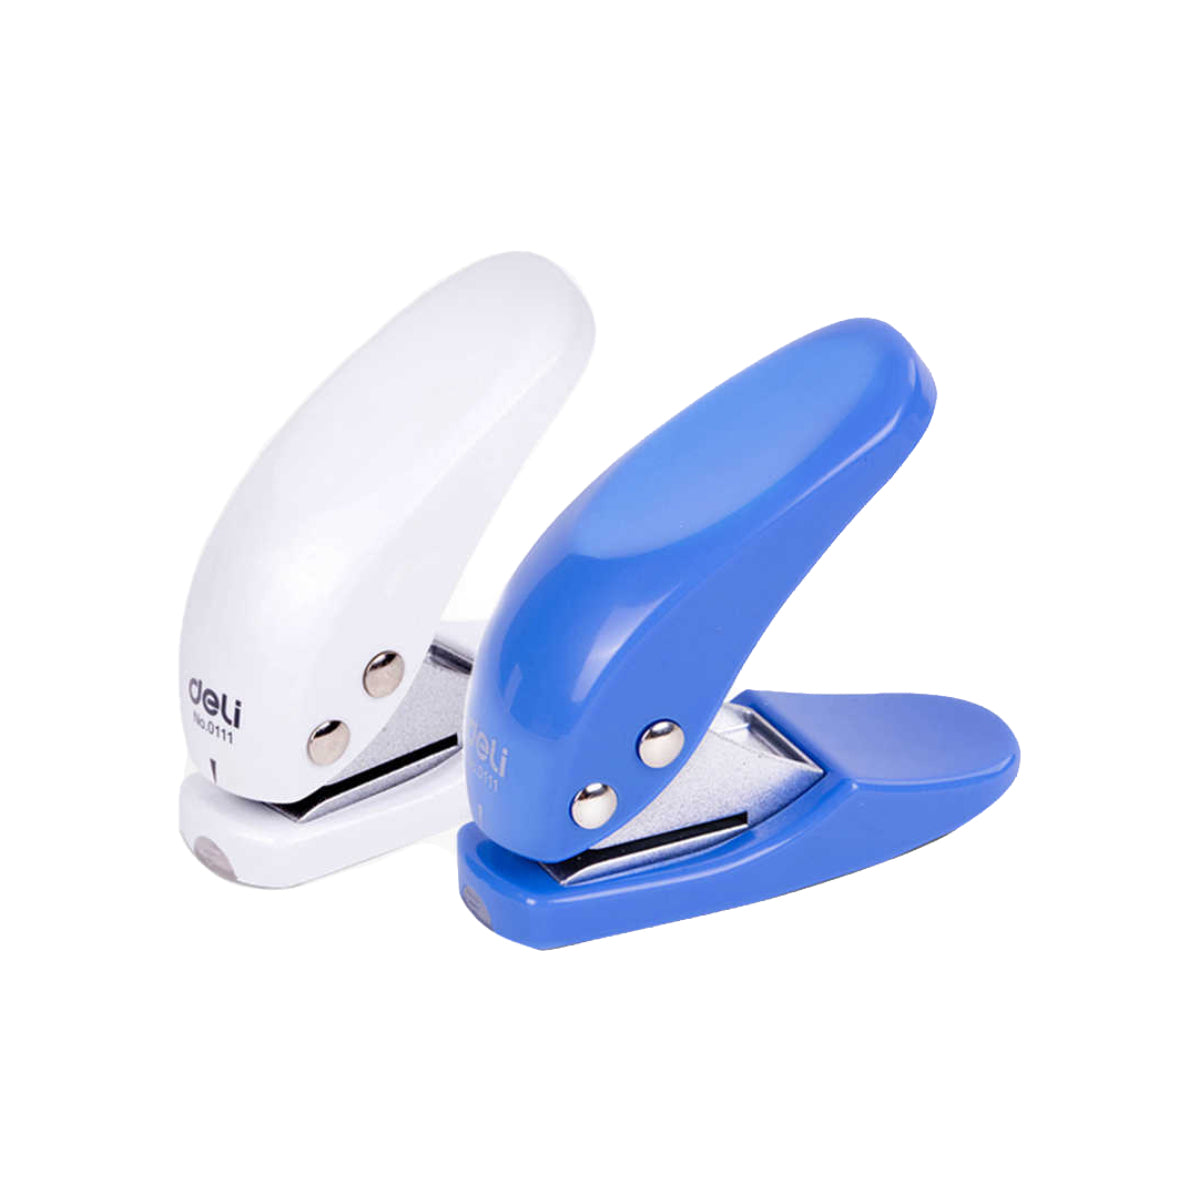 Mini Small Hole Puncher White Color, 10 Sheet Paper Hole Puncher Capacity Single Hole Puncher for Office Use or Gift for Students (White)